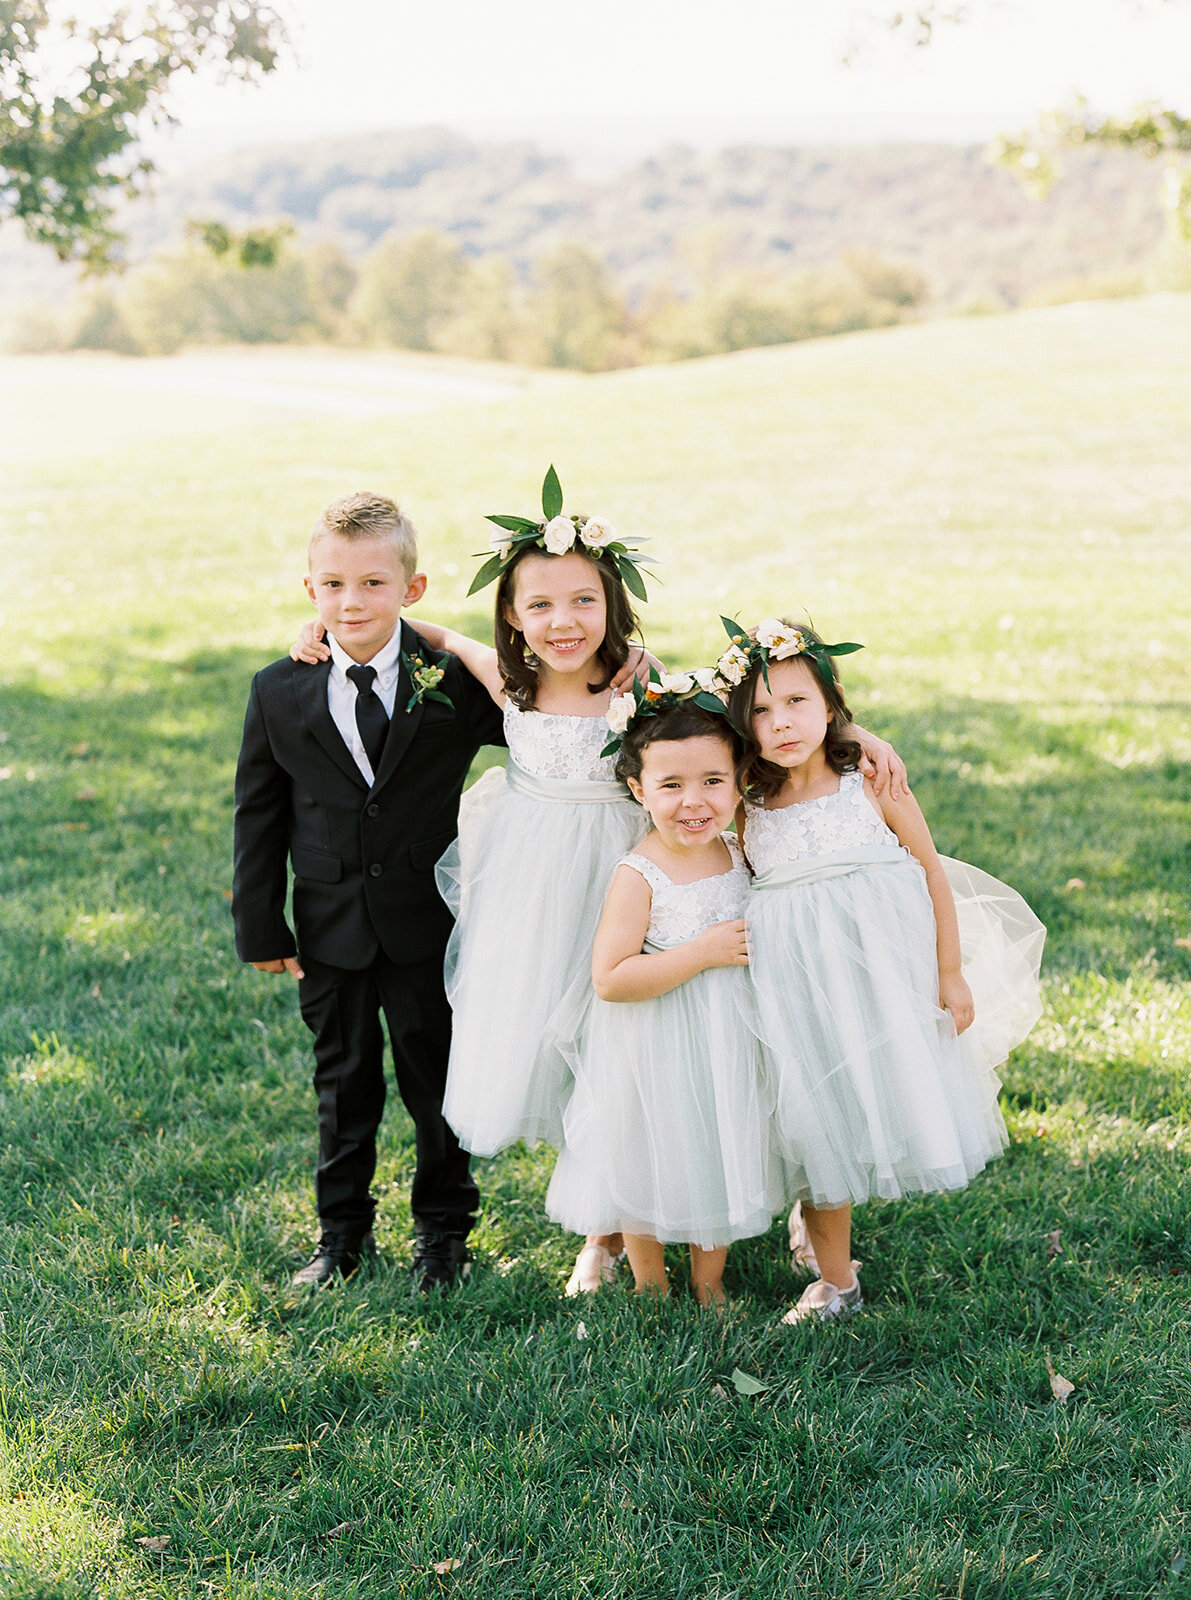 young flower girls and a ring bearer boy standing together